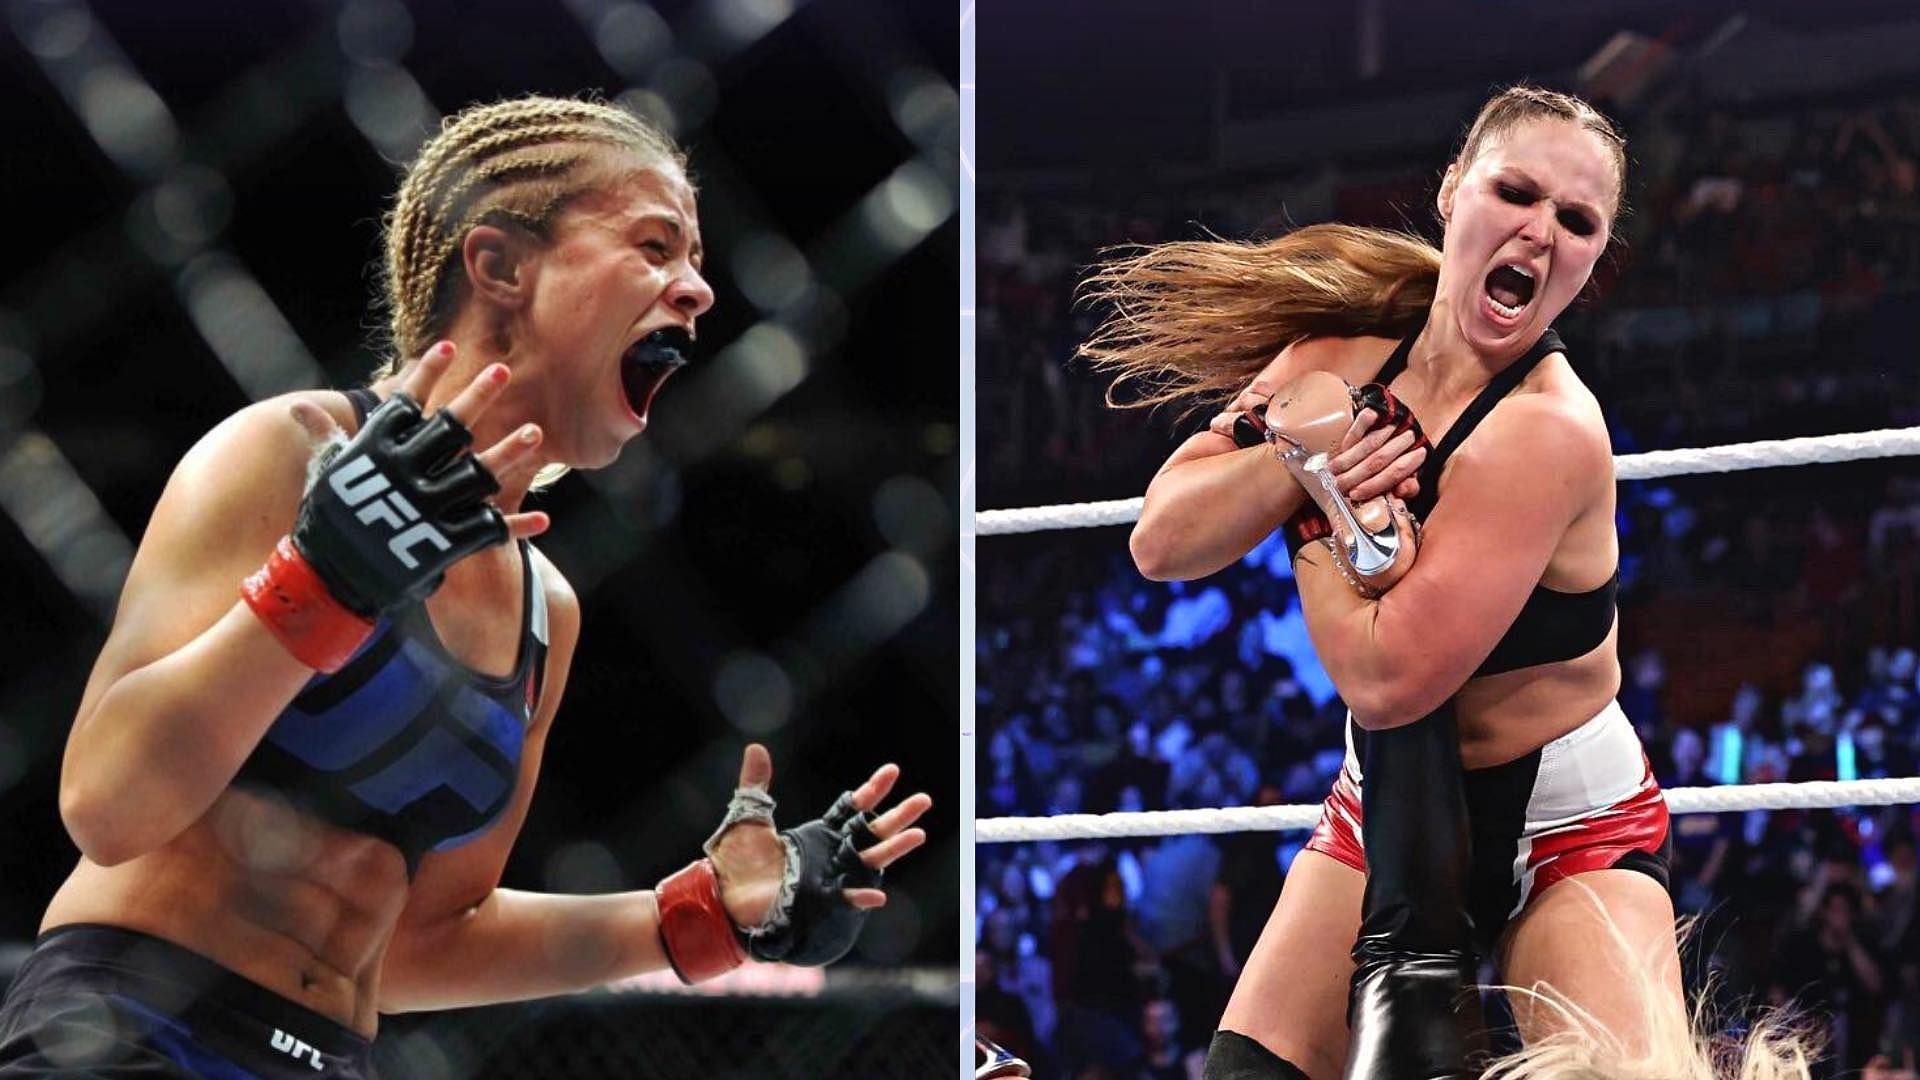 Paige Vanzant and Ronda Rousey are both UFC Fighters-turned wrestlers [Photos taken from respective Twitter accounts]